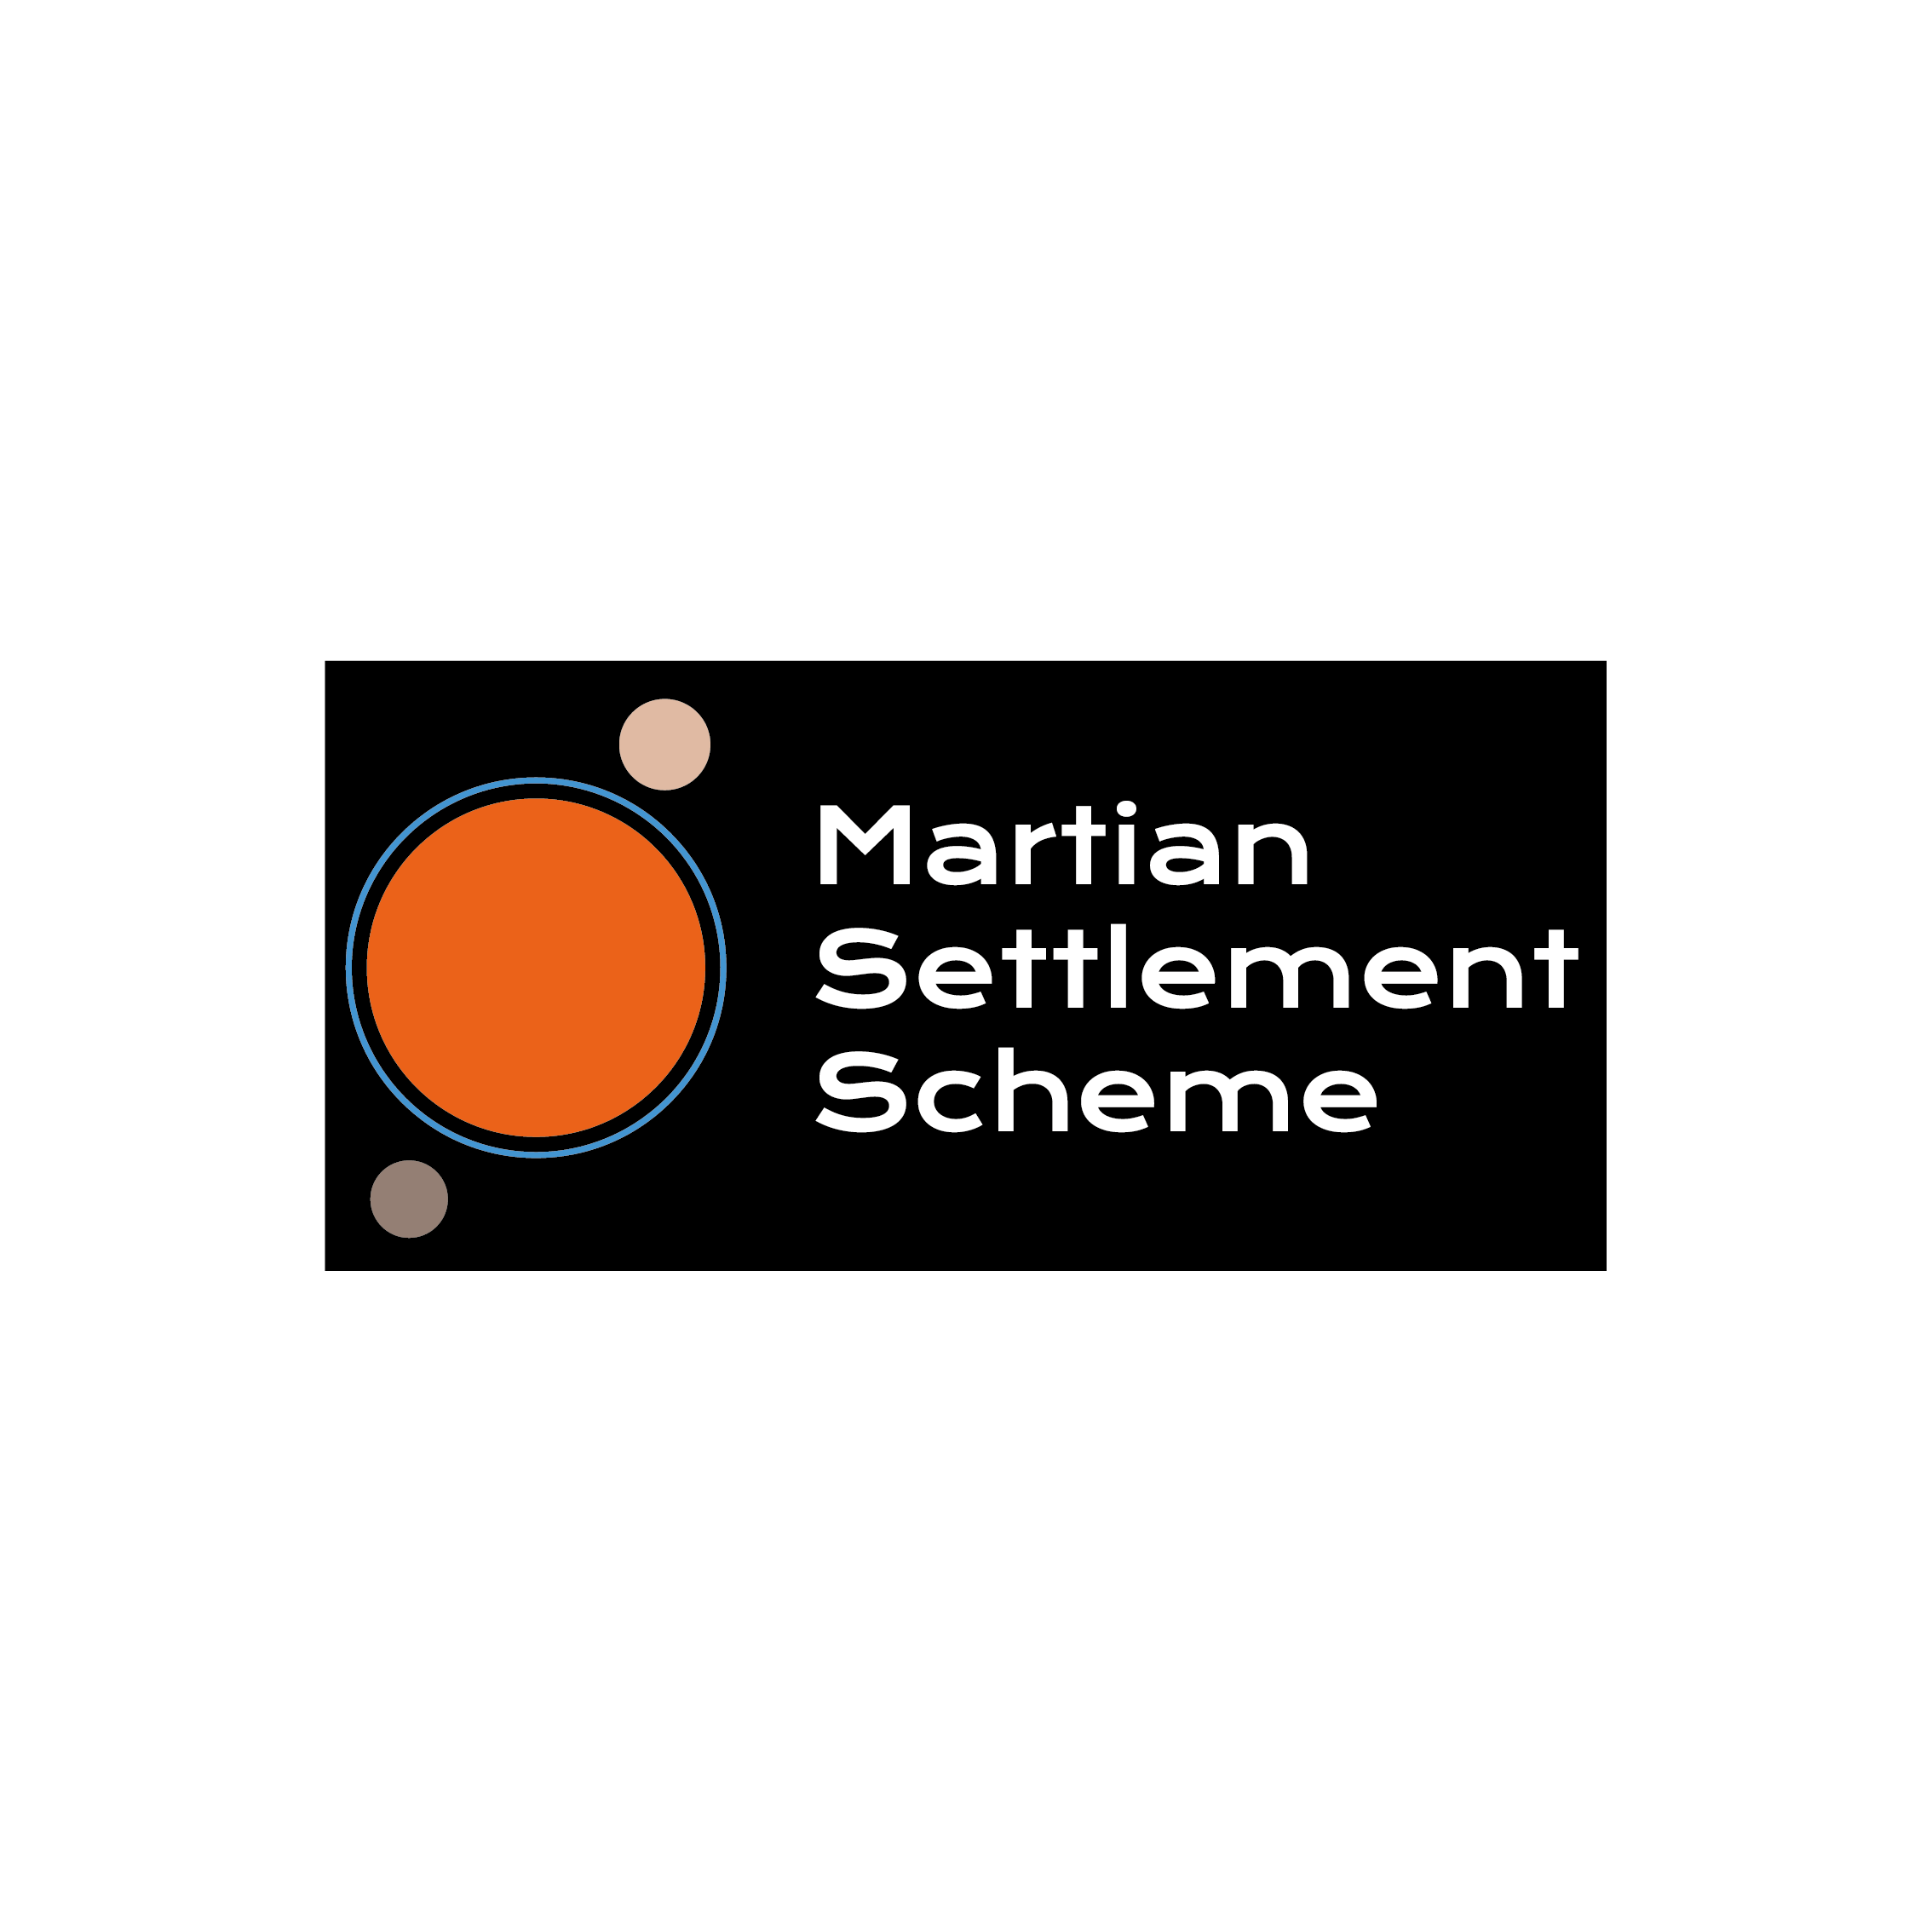 A logo enclosed within a black box. In the right side of the box text reads Martian Settlement Scheme, to the left side of the box is an orange circle, enclosed by the outline of a blue circle. To the top and bottom of the orange circle are two smaller brown circles.